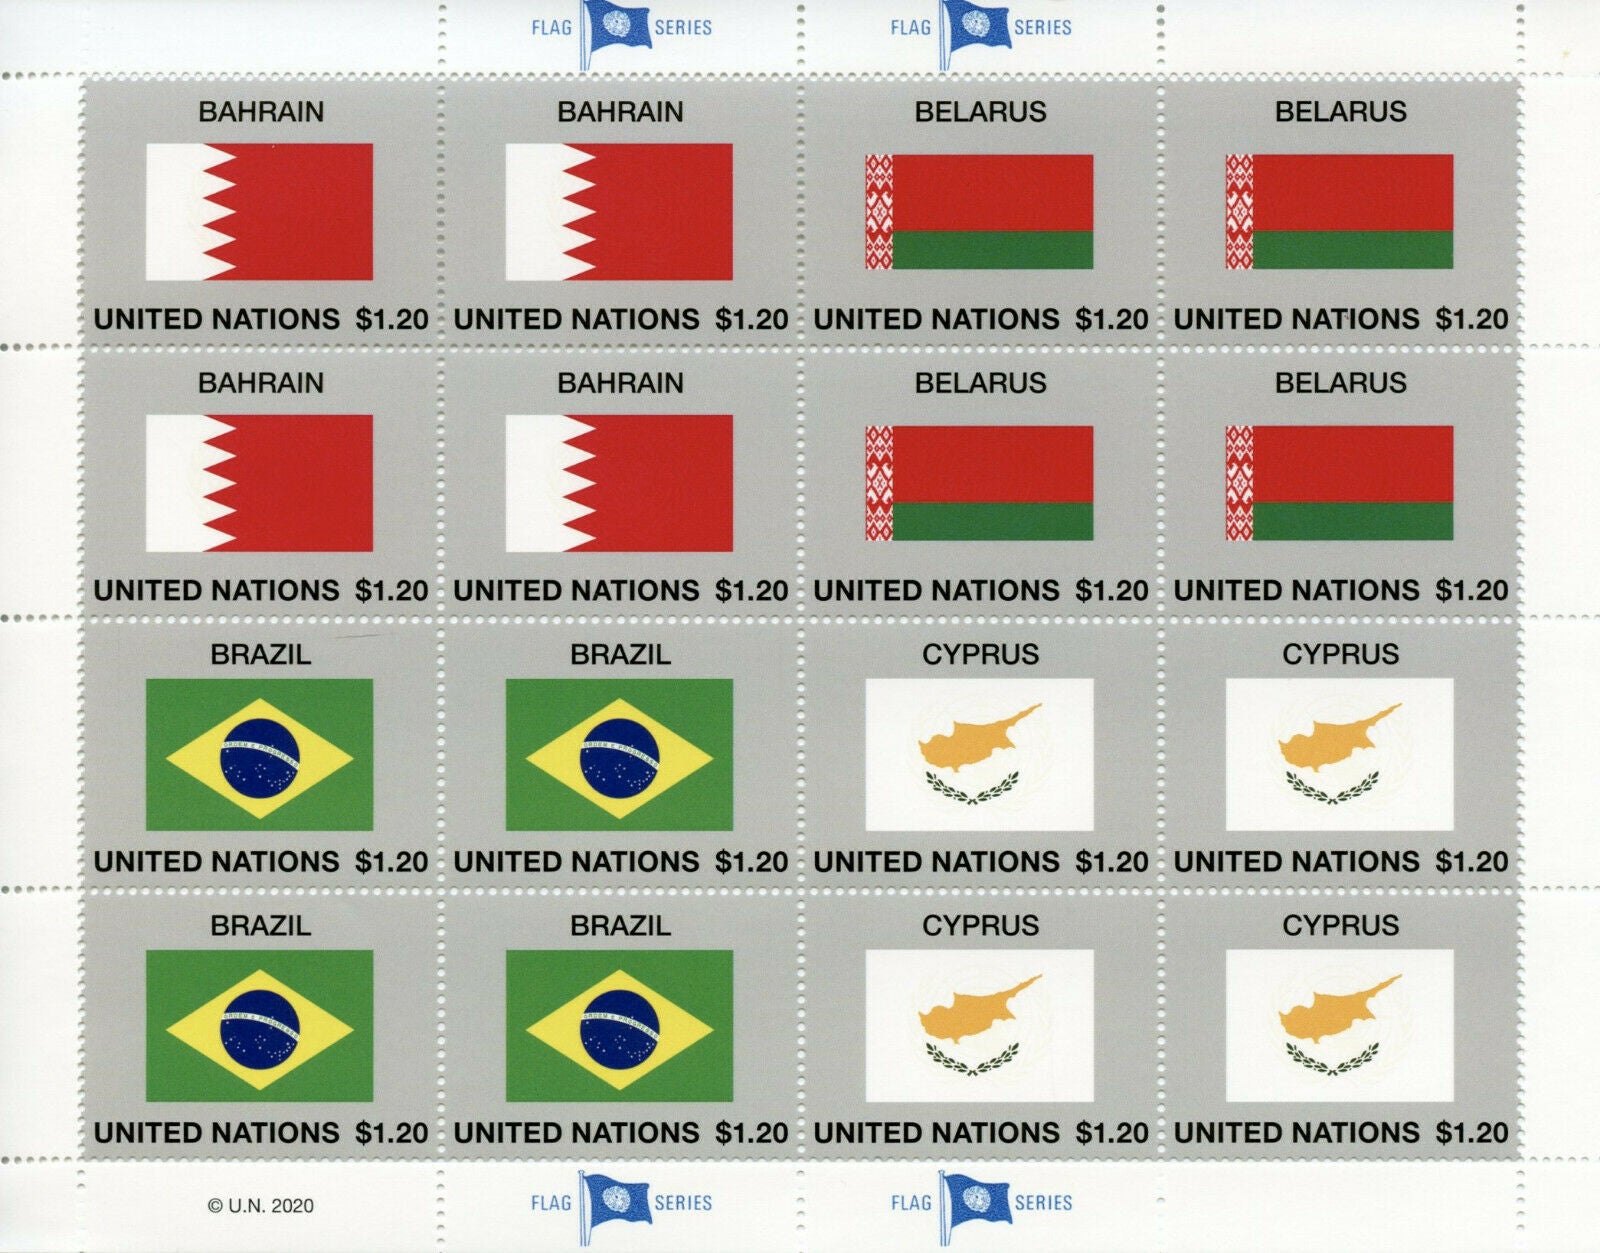 United Nations UN Flags Stamps 2020 MNH Flag Series 56 Bahrain Brazil 16v M/S